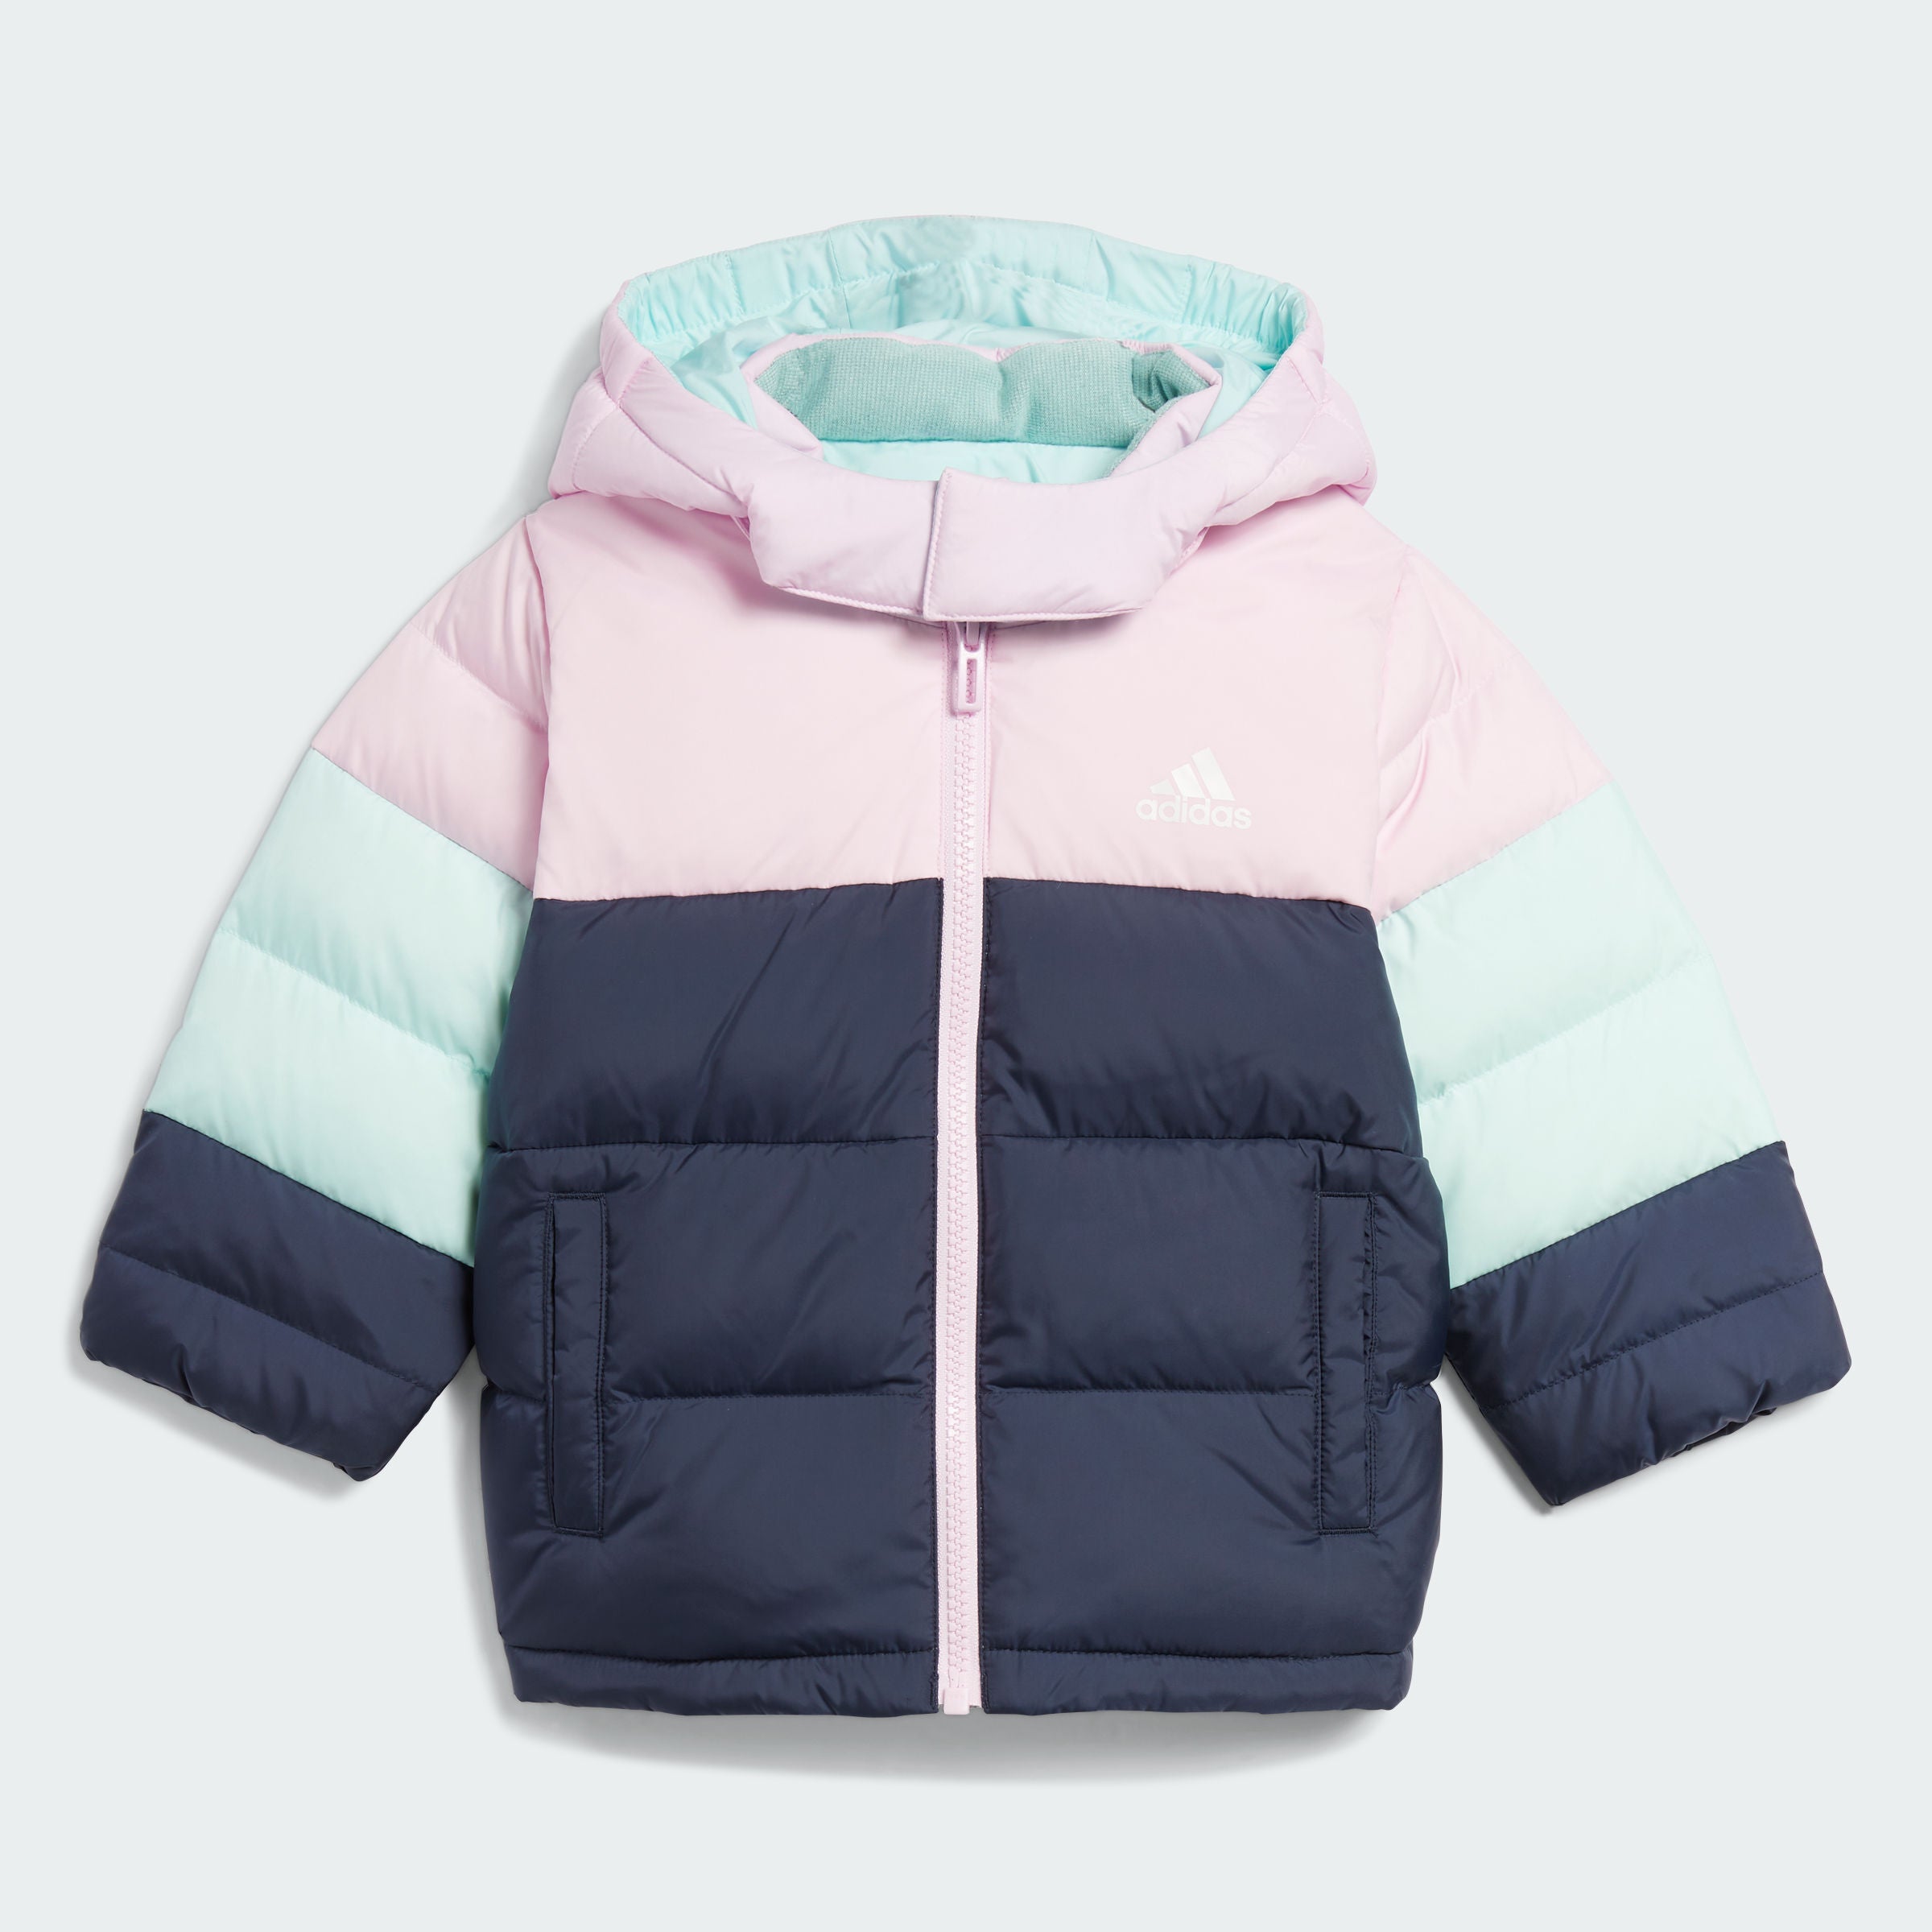 adidas, clothes, ESSENTIALS,  girl,  外套, 女嬰, 嬰童, 帽TEE, open for kids